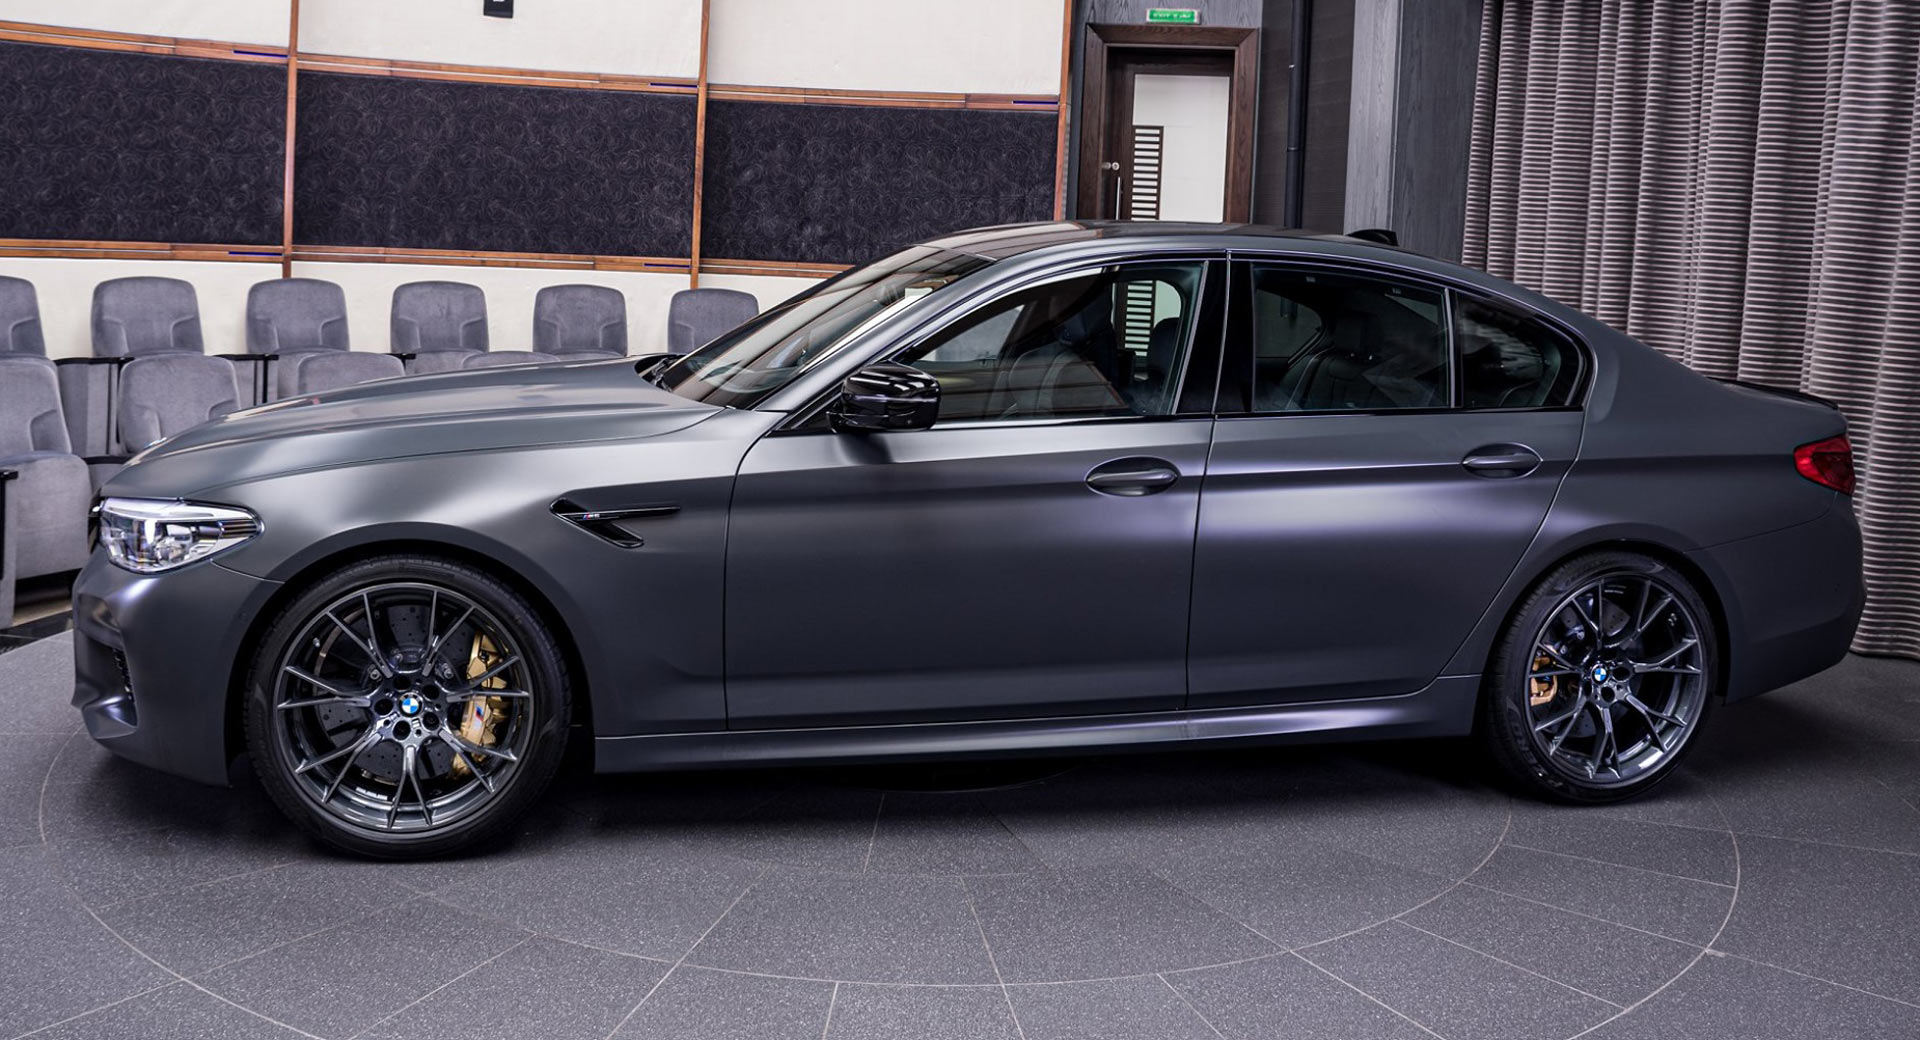 The 2020 BMW M5 Edition 35 Years.